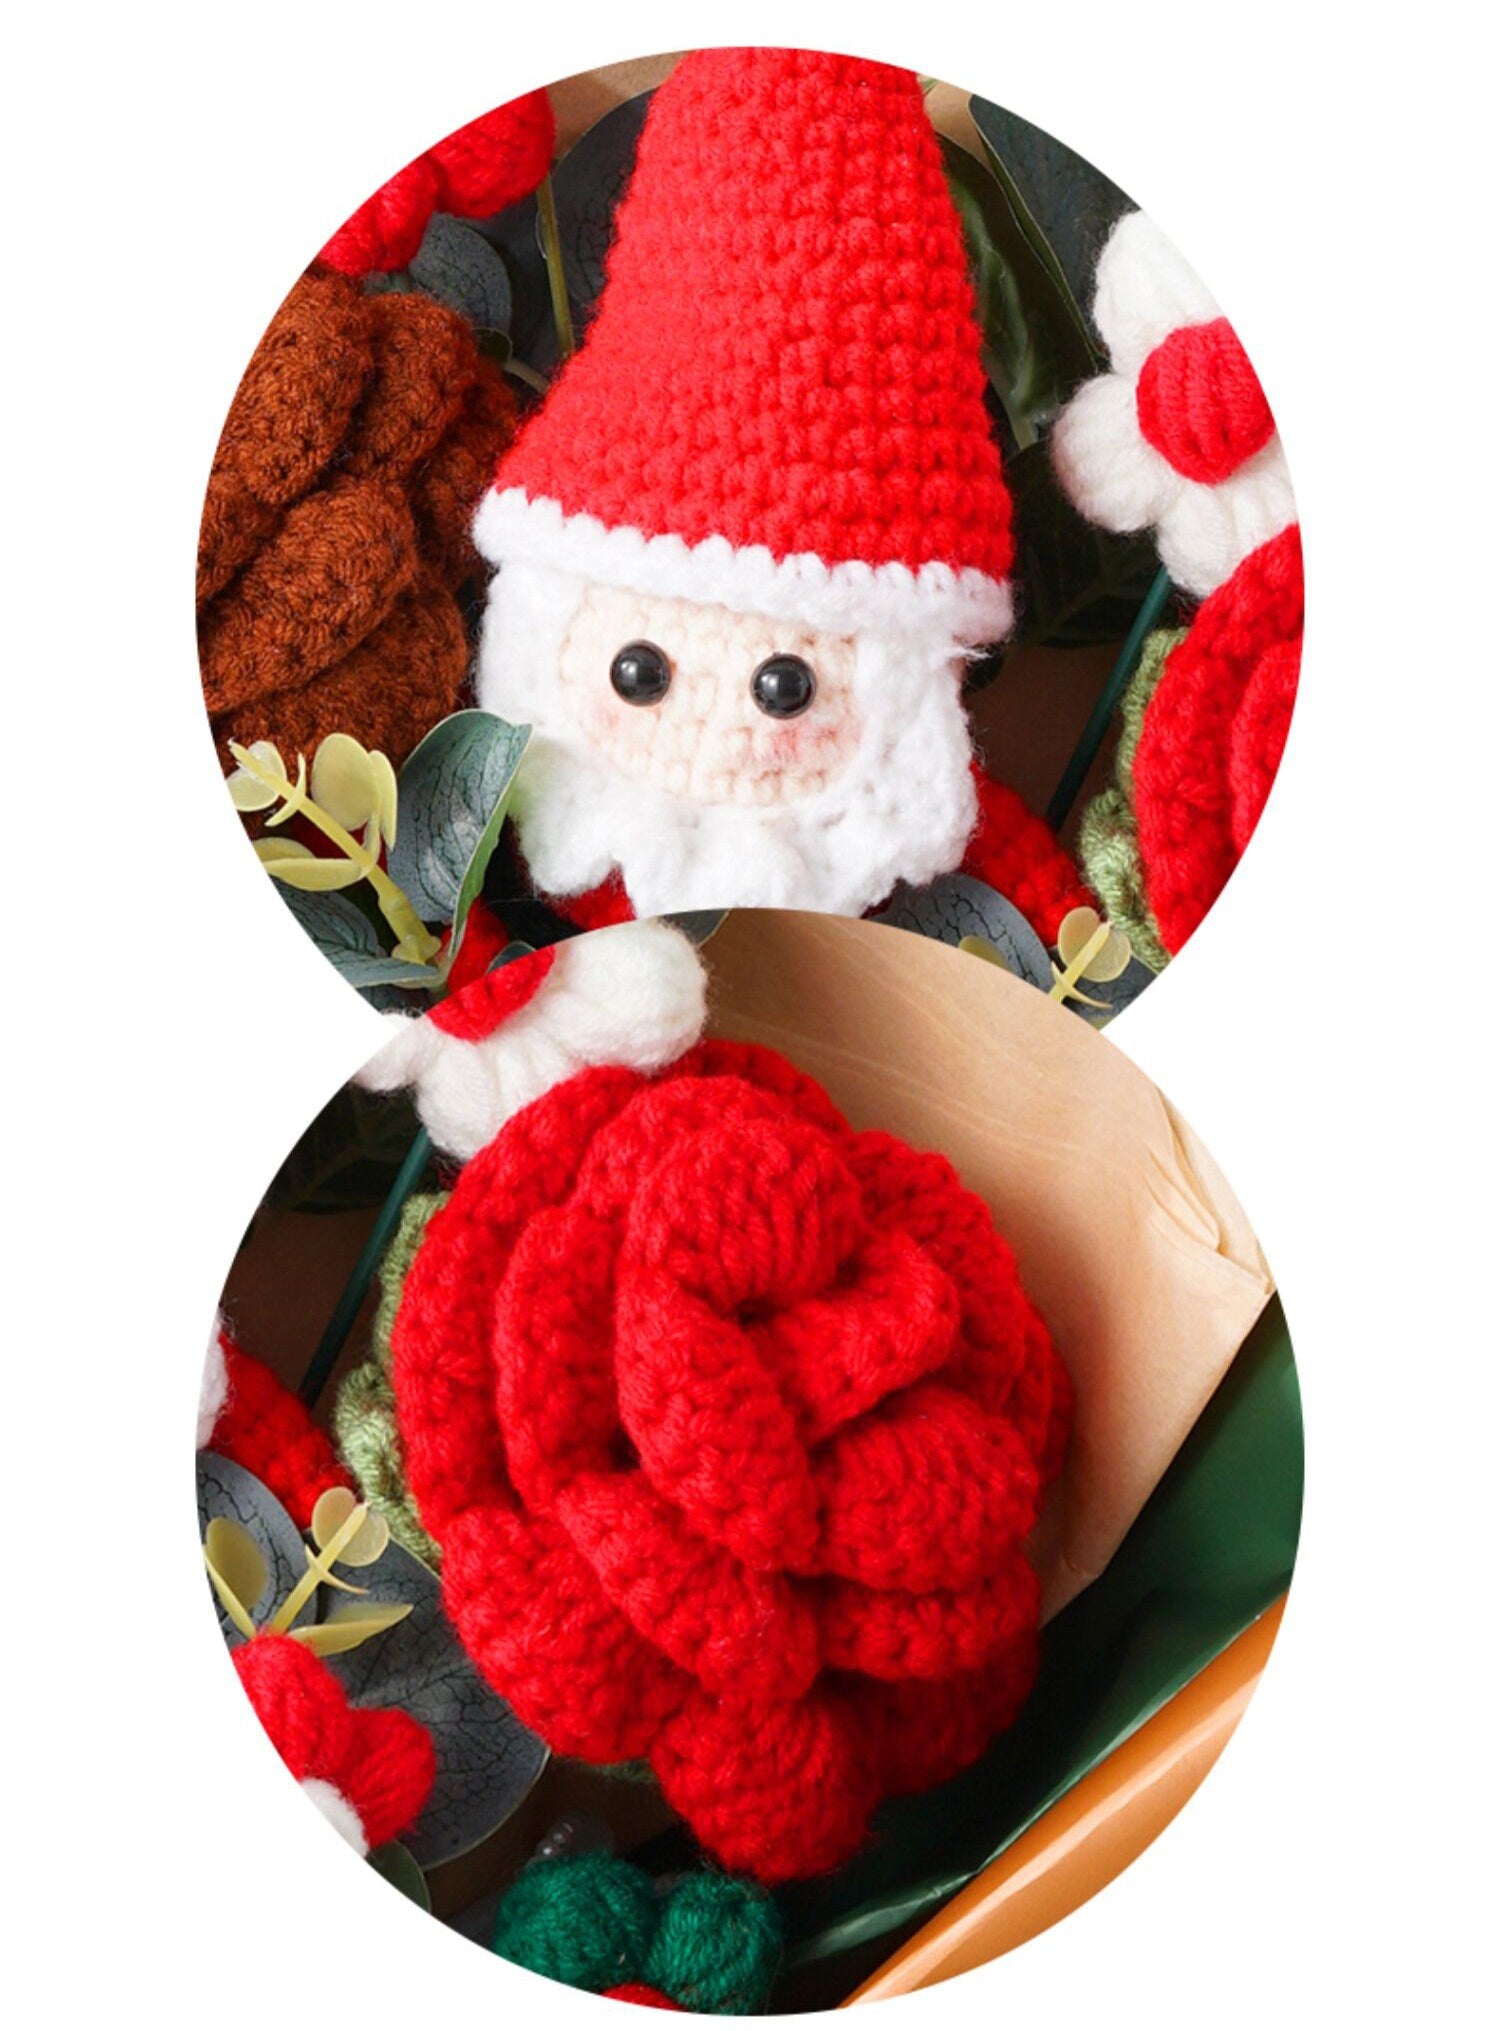 Crochet Bouquet - Hand Knit - Christmas Gifts - Gifts for Her - Christmas Bouquets